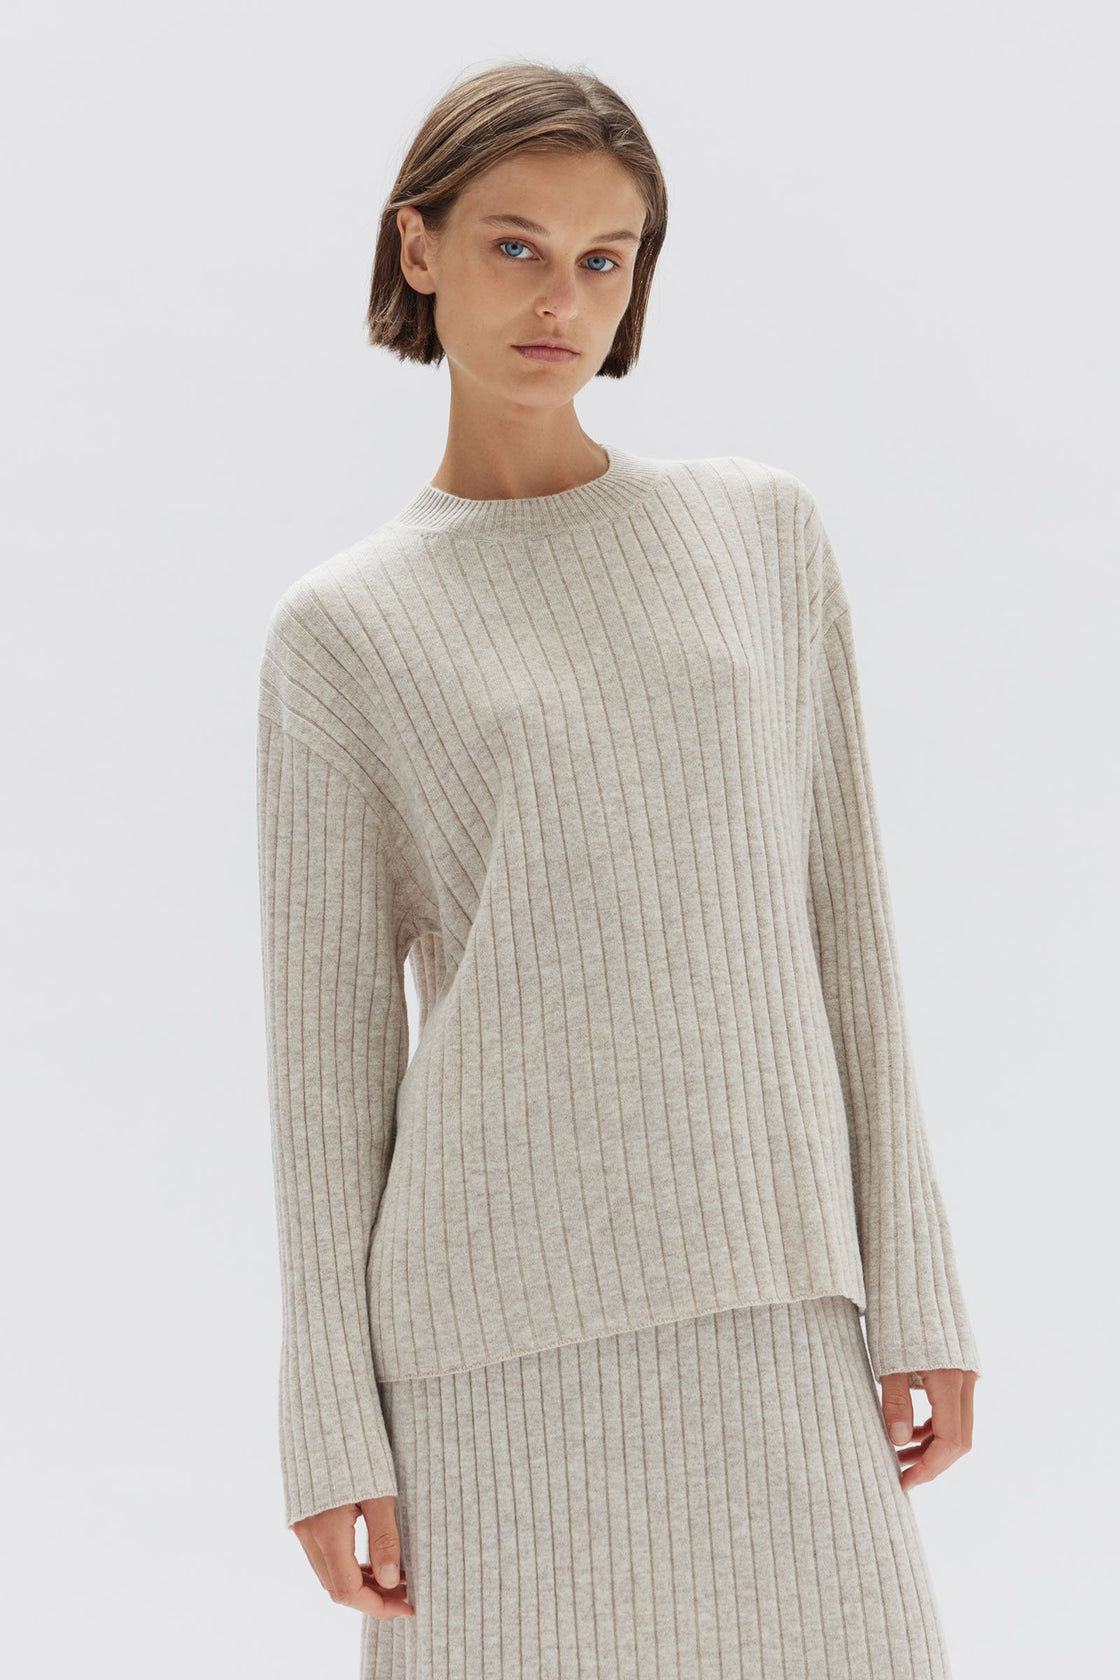 Assembly Label Wool Cashmere Rib Top